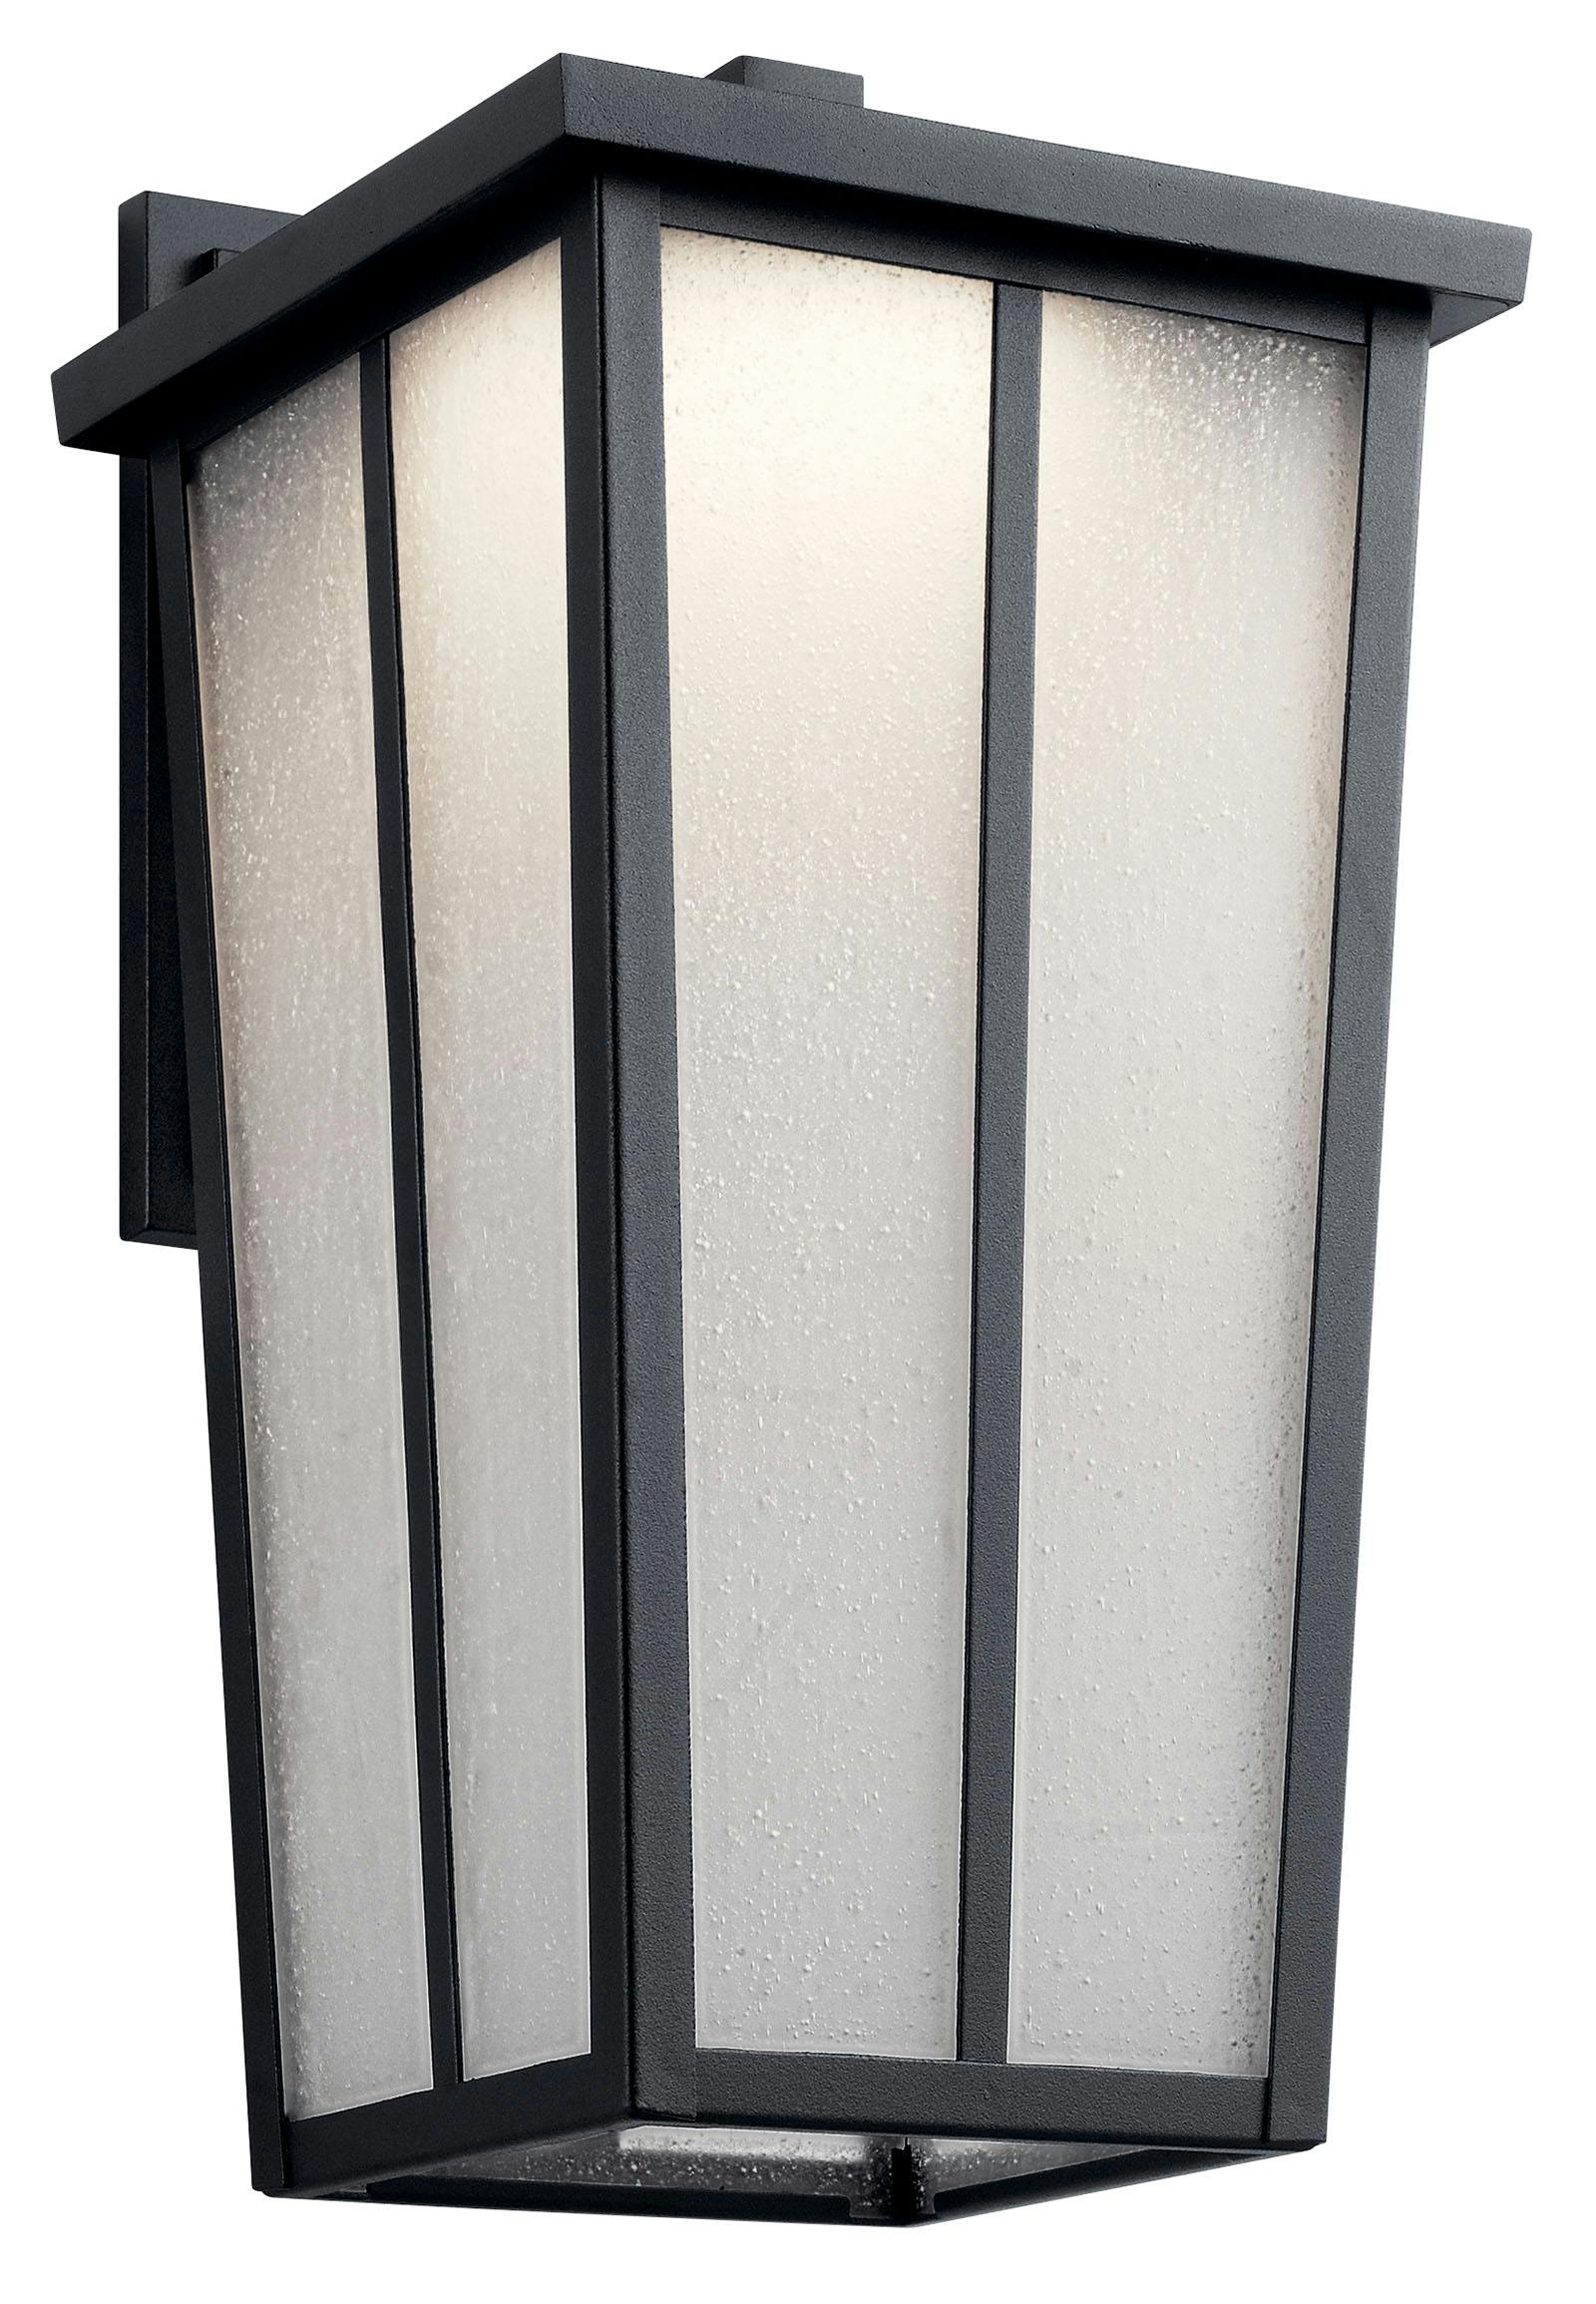 Amber Valley 17.25" LED Wall Light Black on a white background